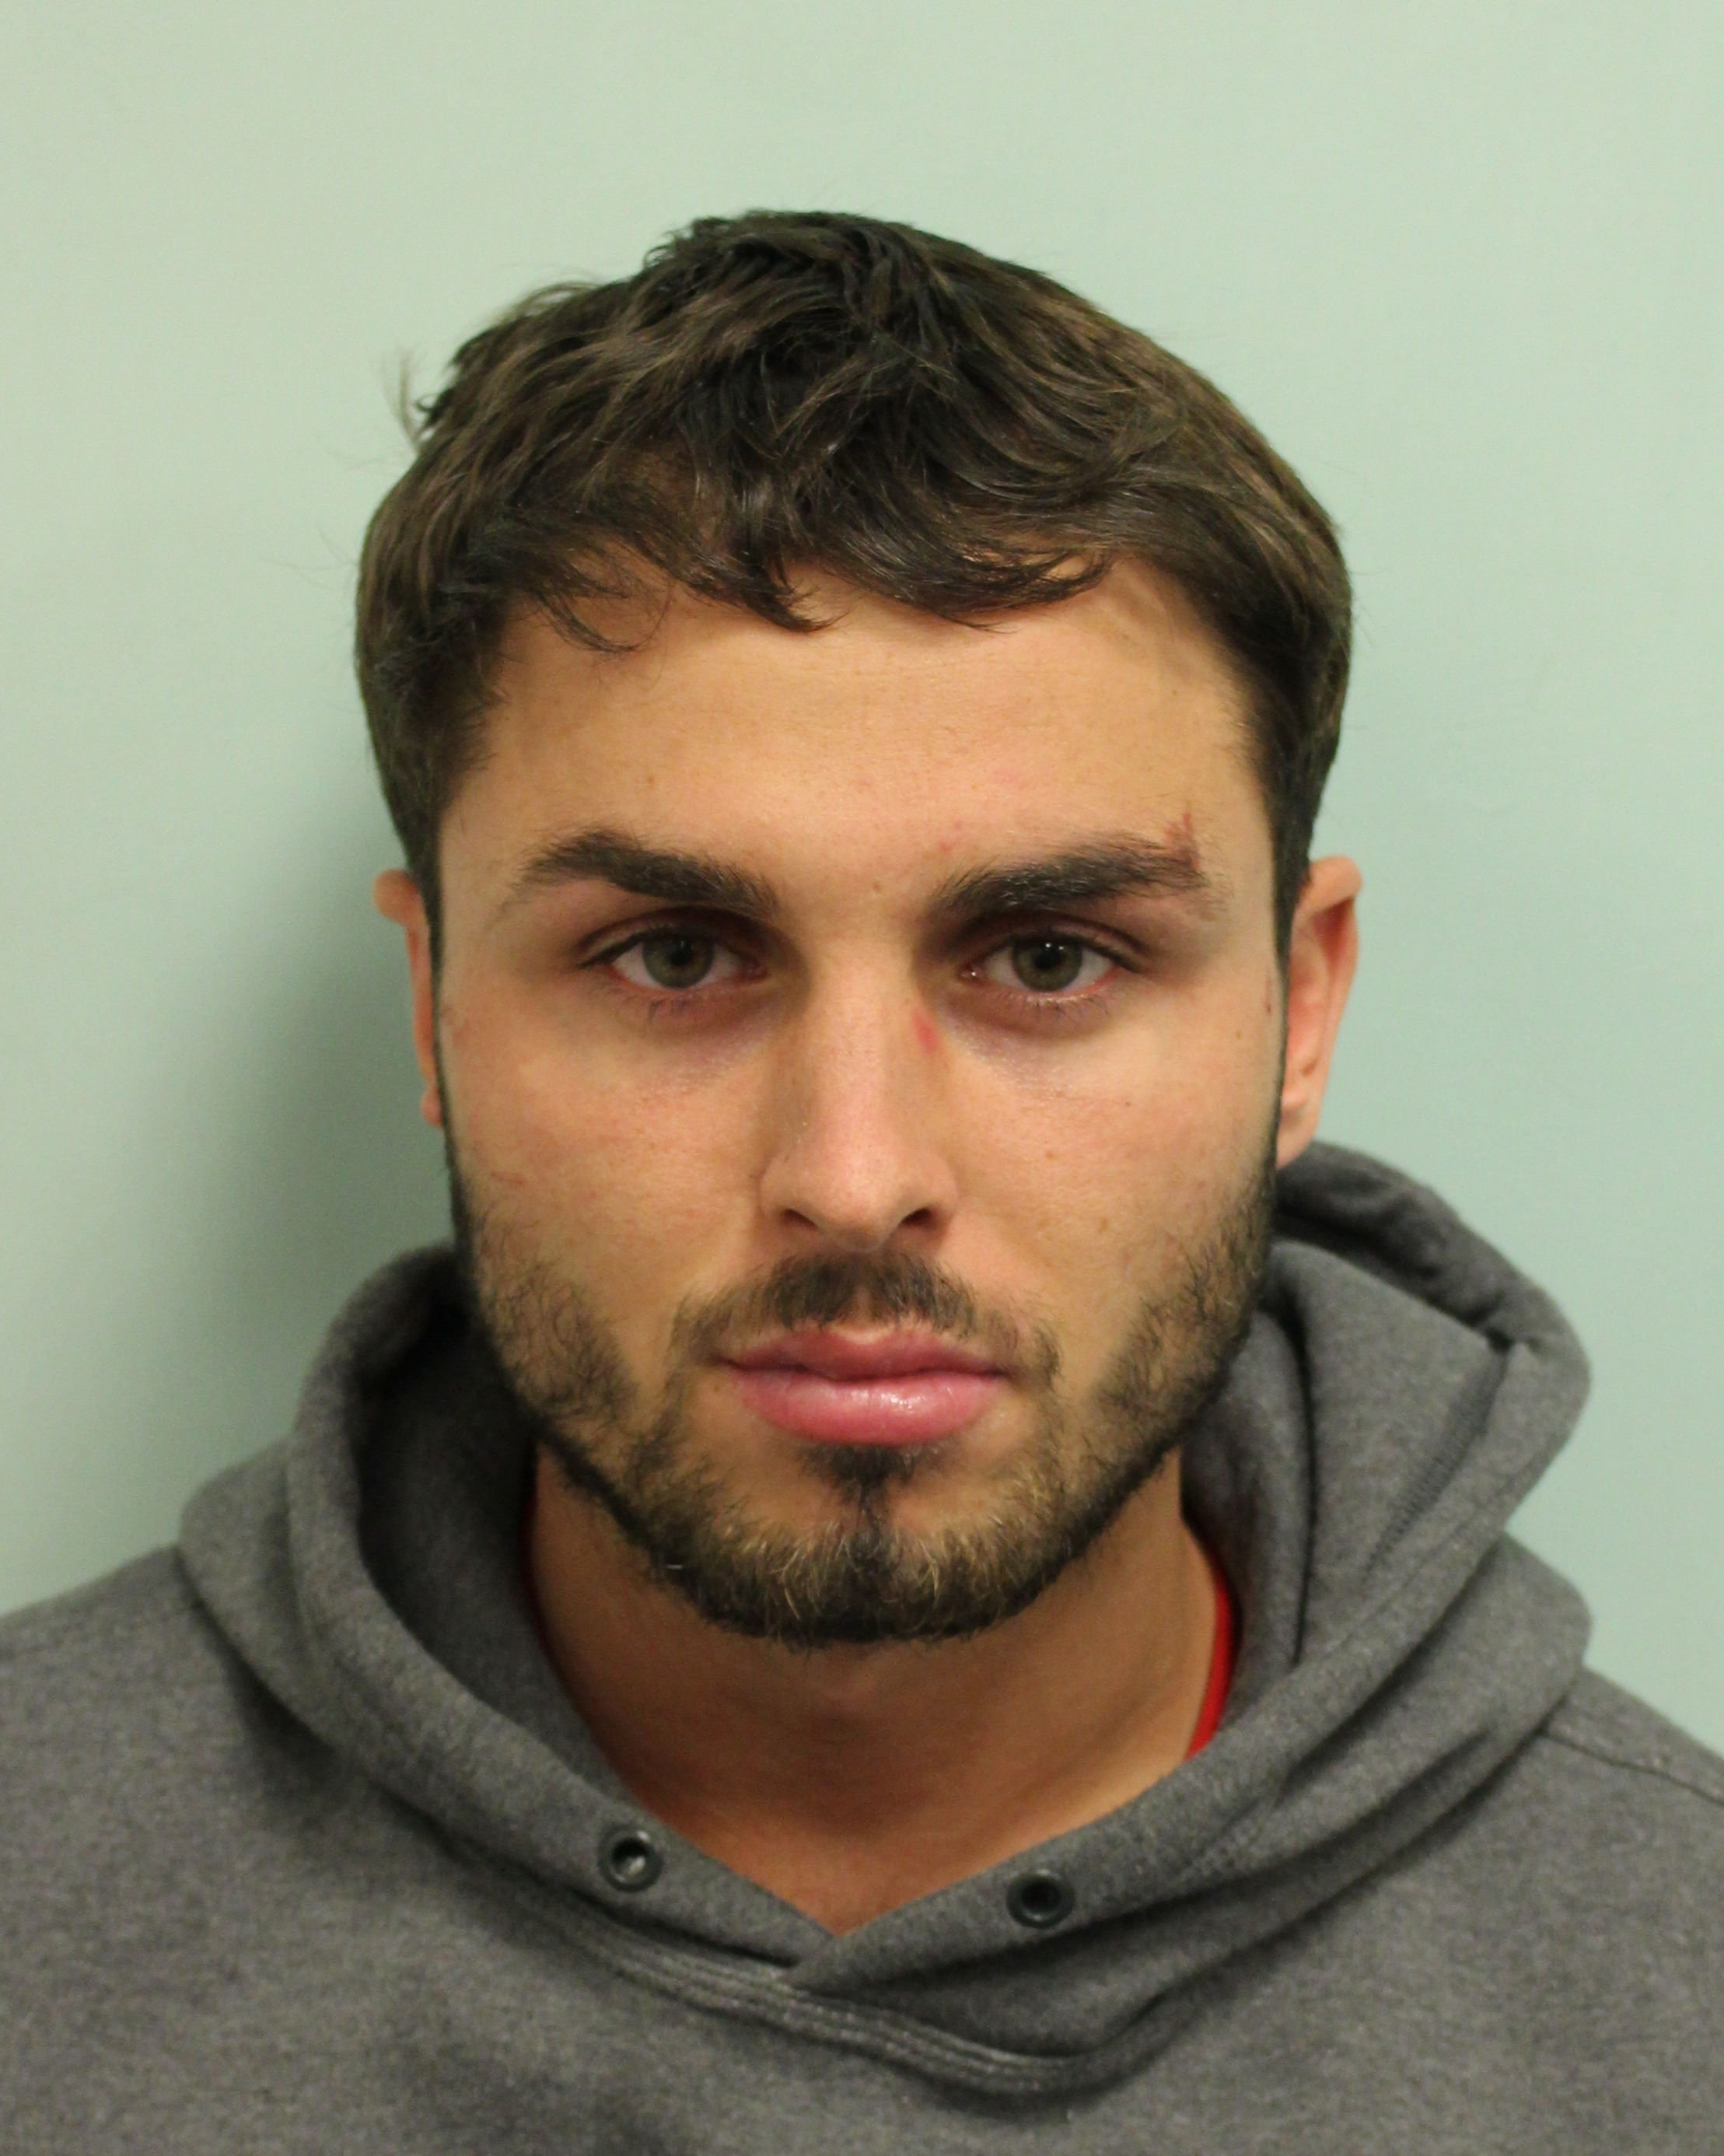 <strong>Arthur Collins has been jailed for 20 years over an acid attack in a London nightclub&nbsp;</strong>